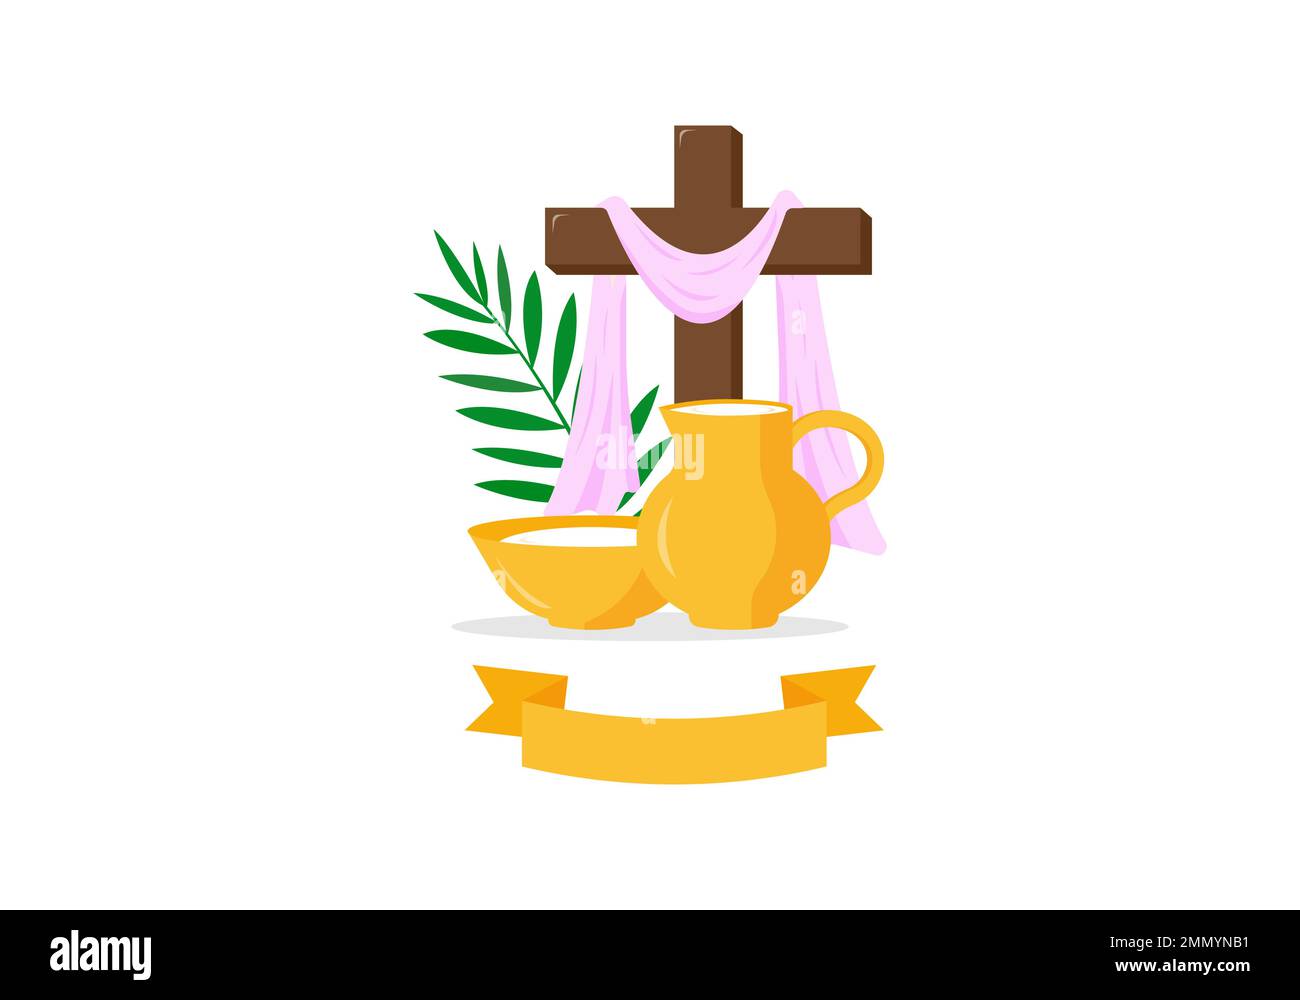 Christian greeting card or banner of the Holy Week before Easter. the bason and ewer with water, palm branches, cross of Jesus Christ, clean ribbon. Vector illustration Stock Vector